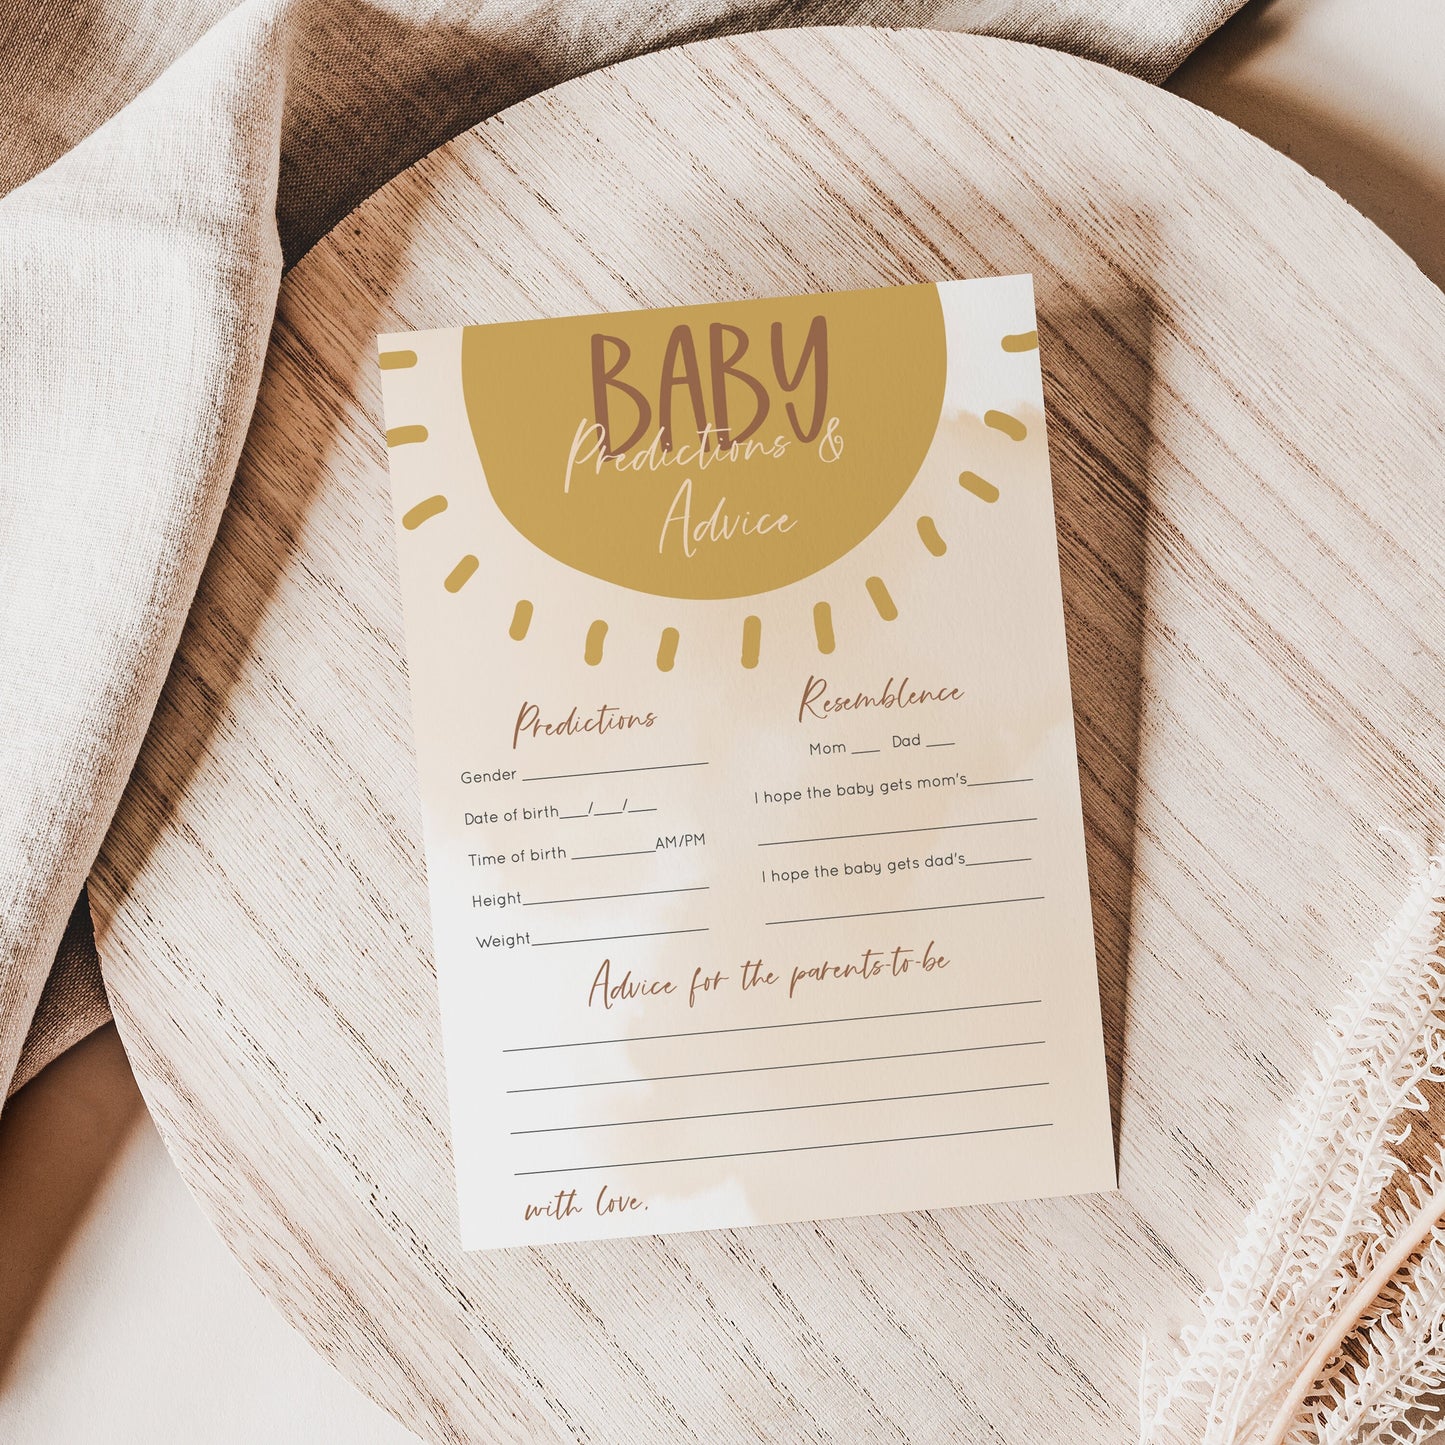 Editable Baby Predictions and Advice Cards Sunshine Baby Shower Games Boho Baby Shower Games Template